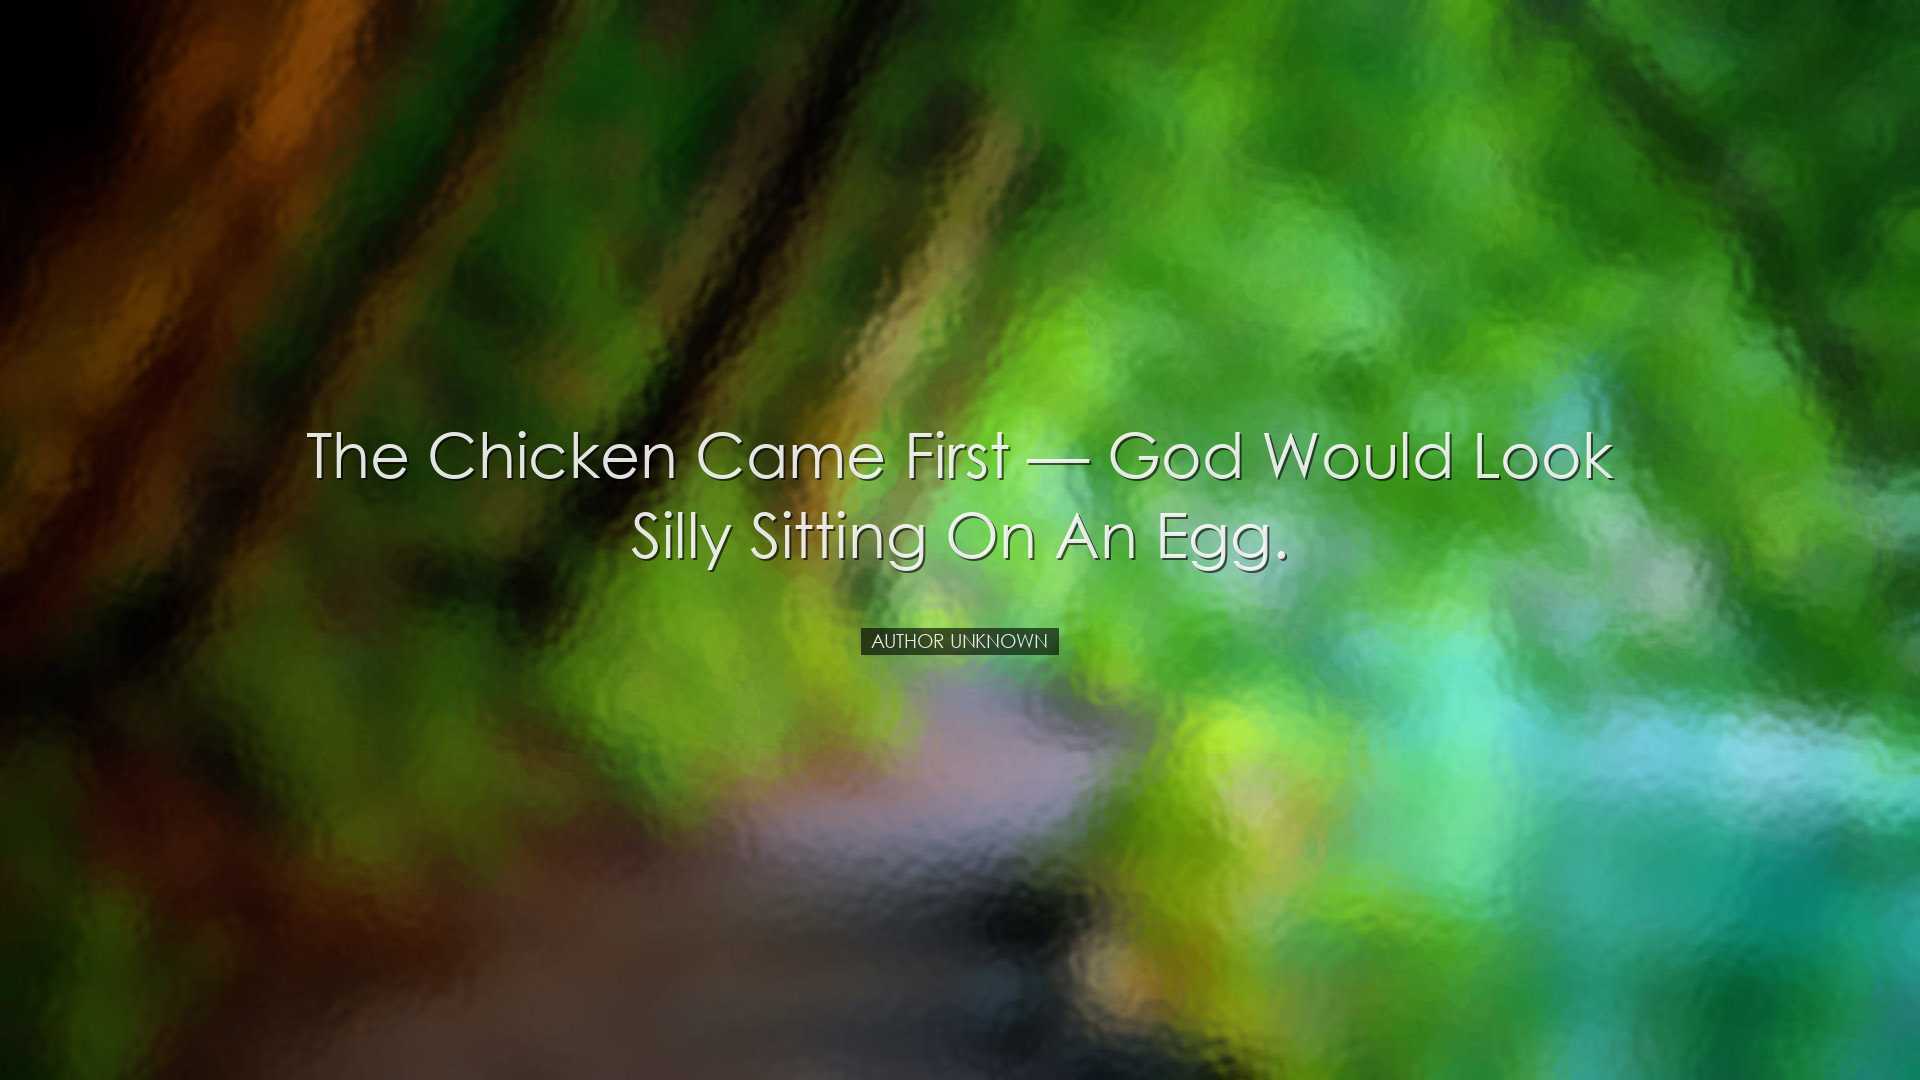 The chicken came first â€” God would look silly sitting on an